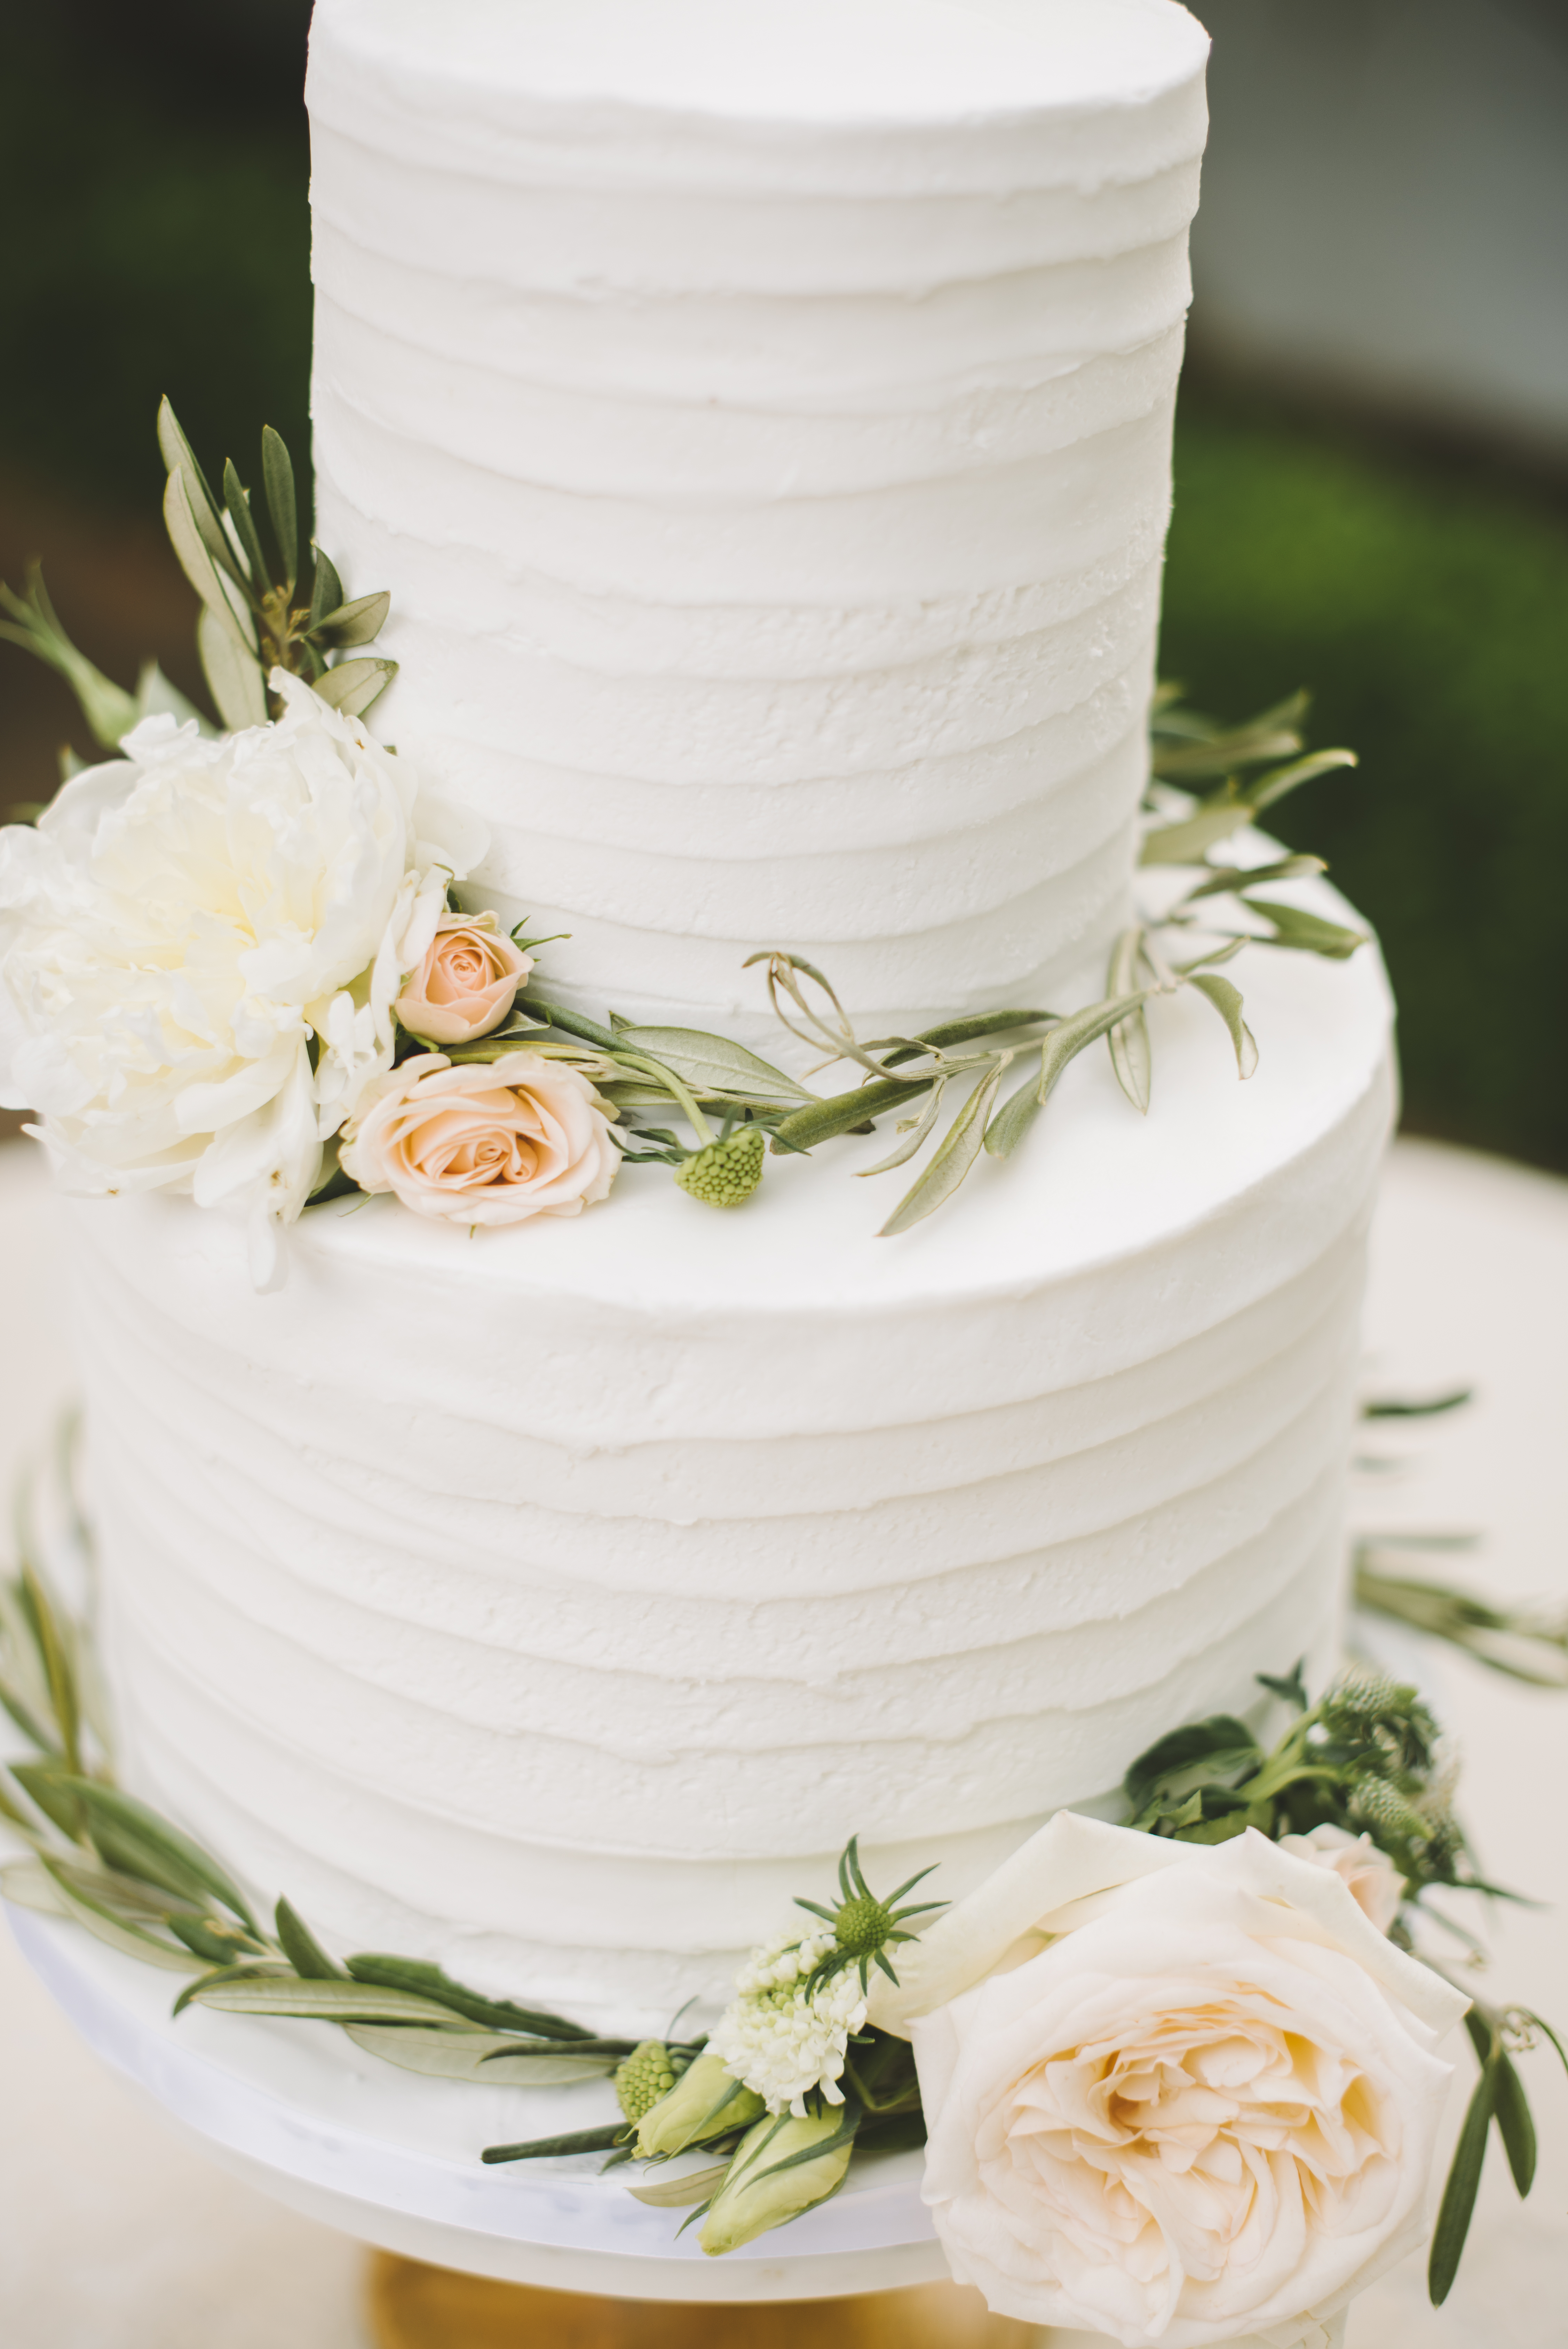 Wedding Cake with flowers ang olive leaves